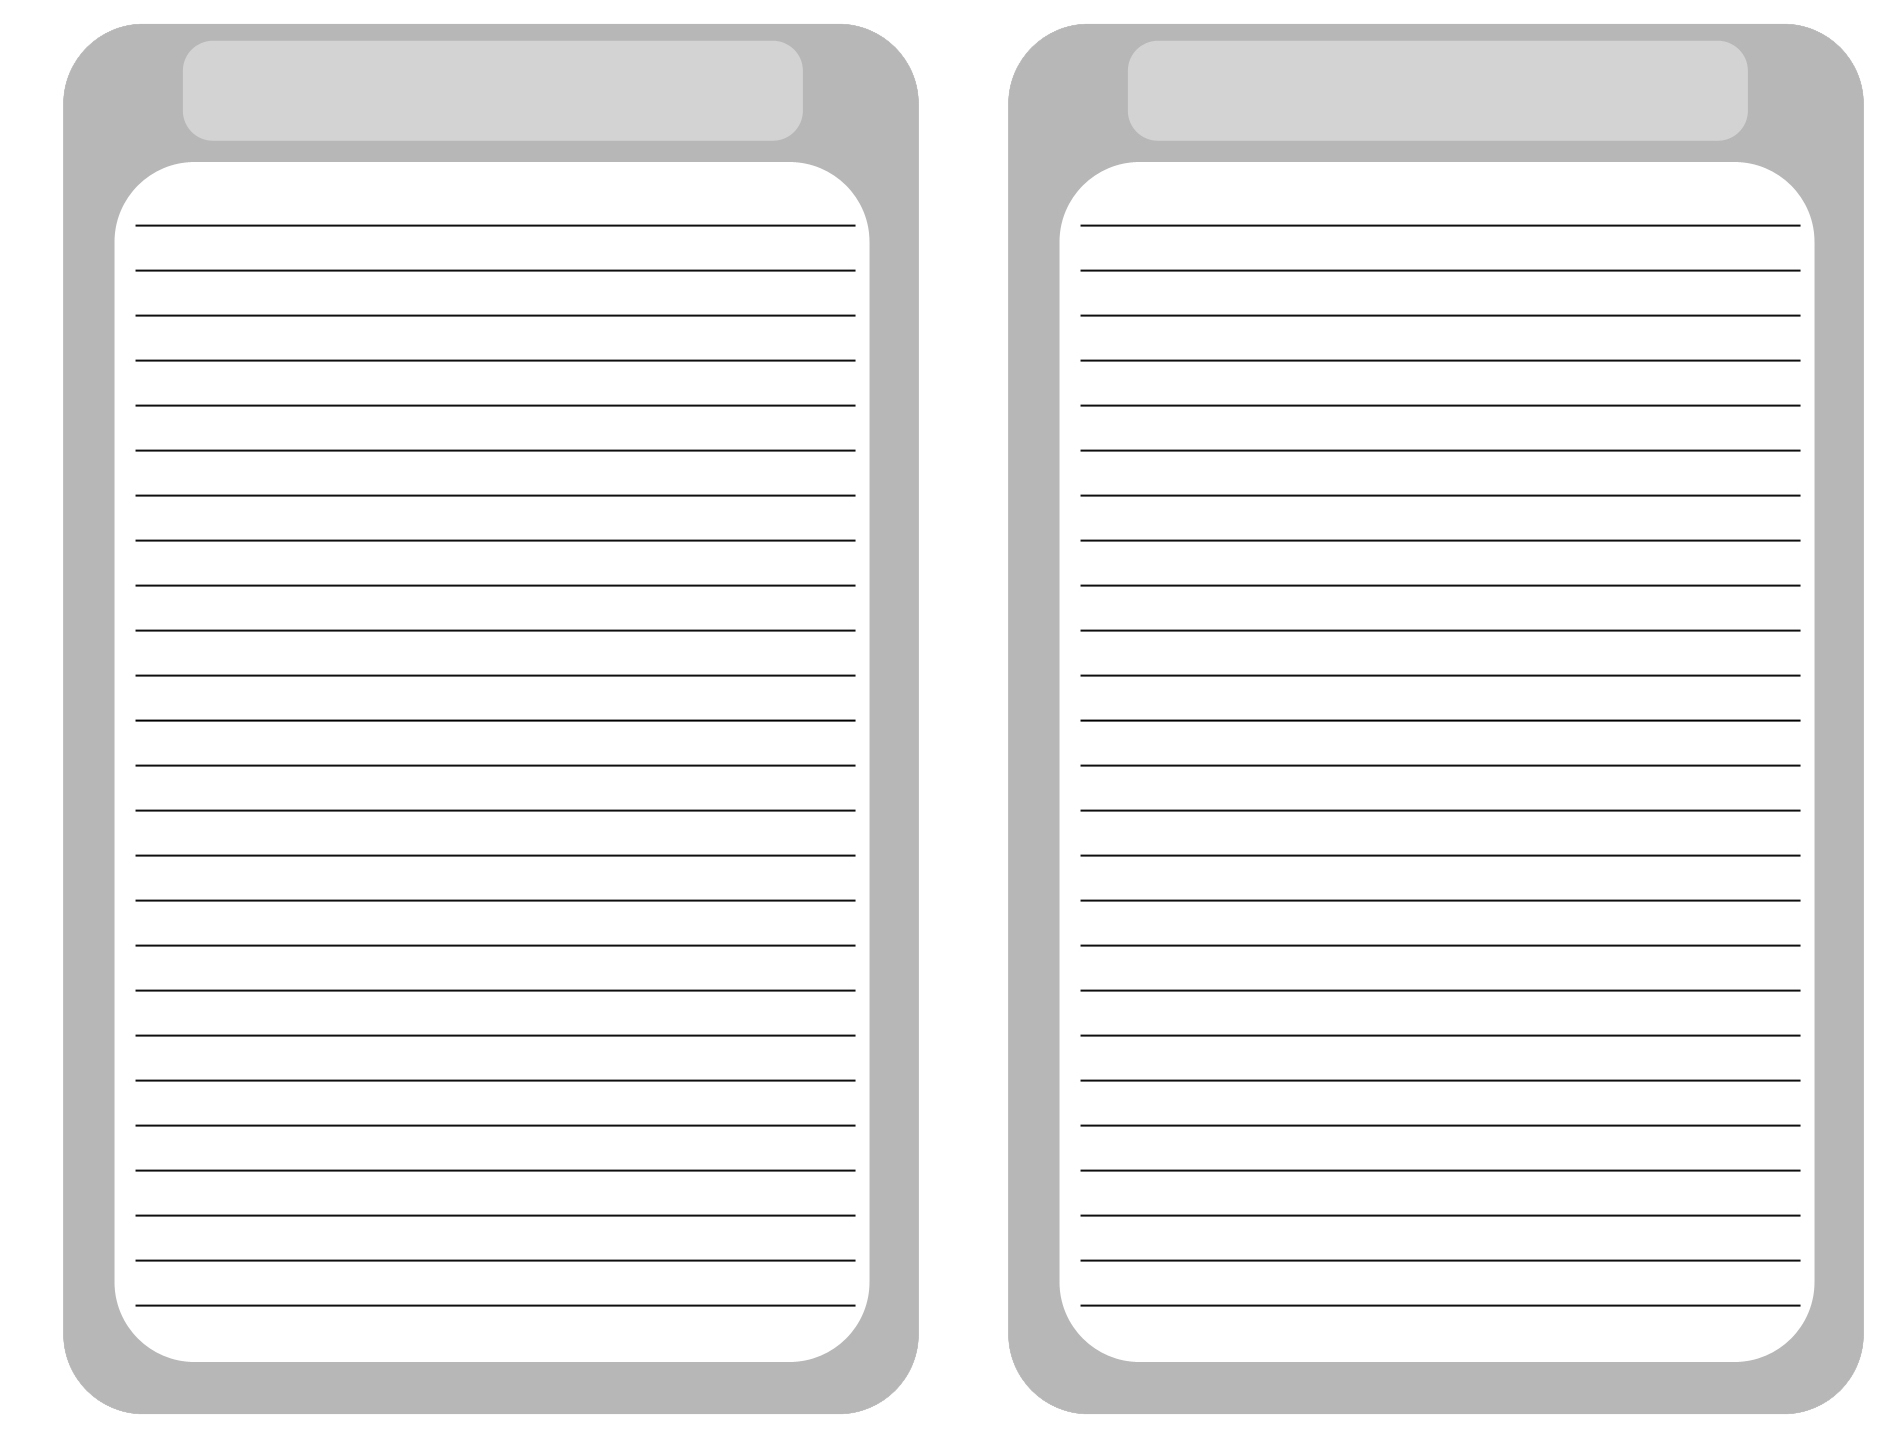 4-best-images-of-free-printable-blank-journal-pages-free-printable